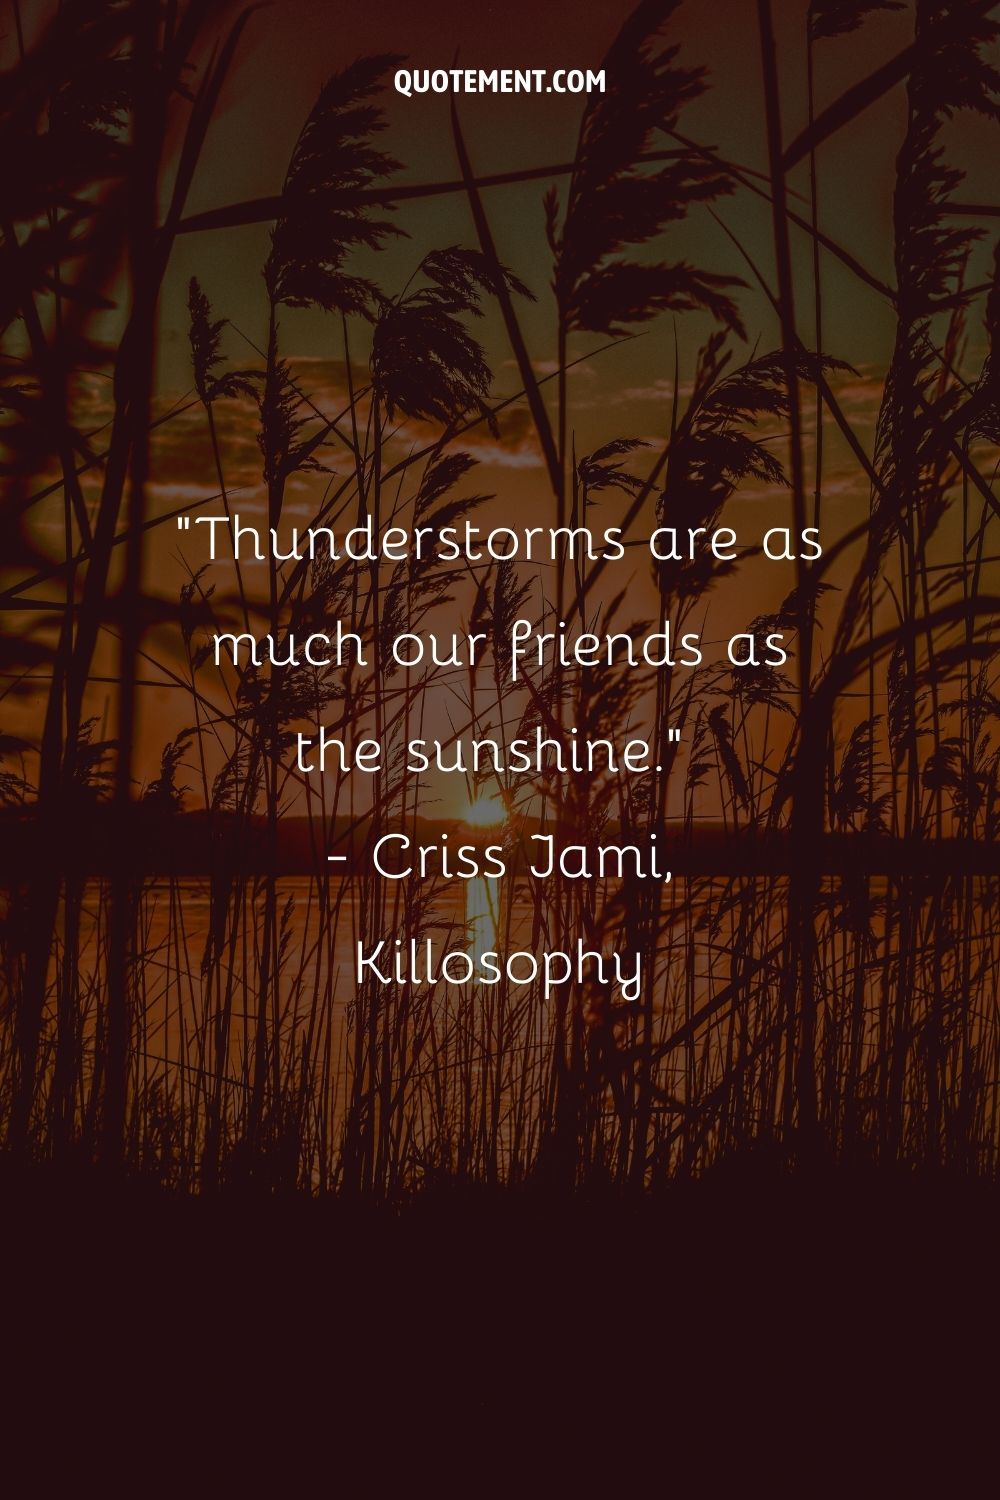 Thunderstorms are as much our friends as the sunshine.